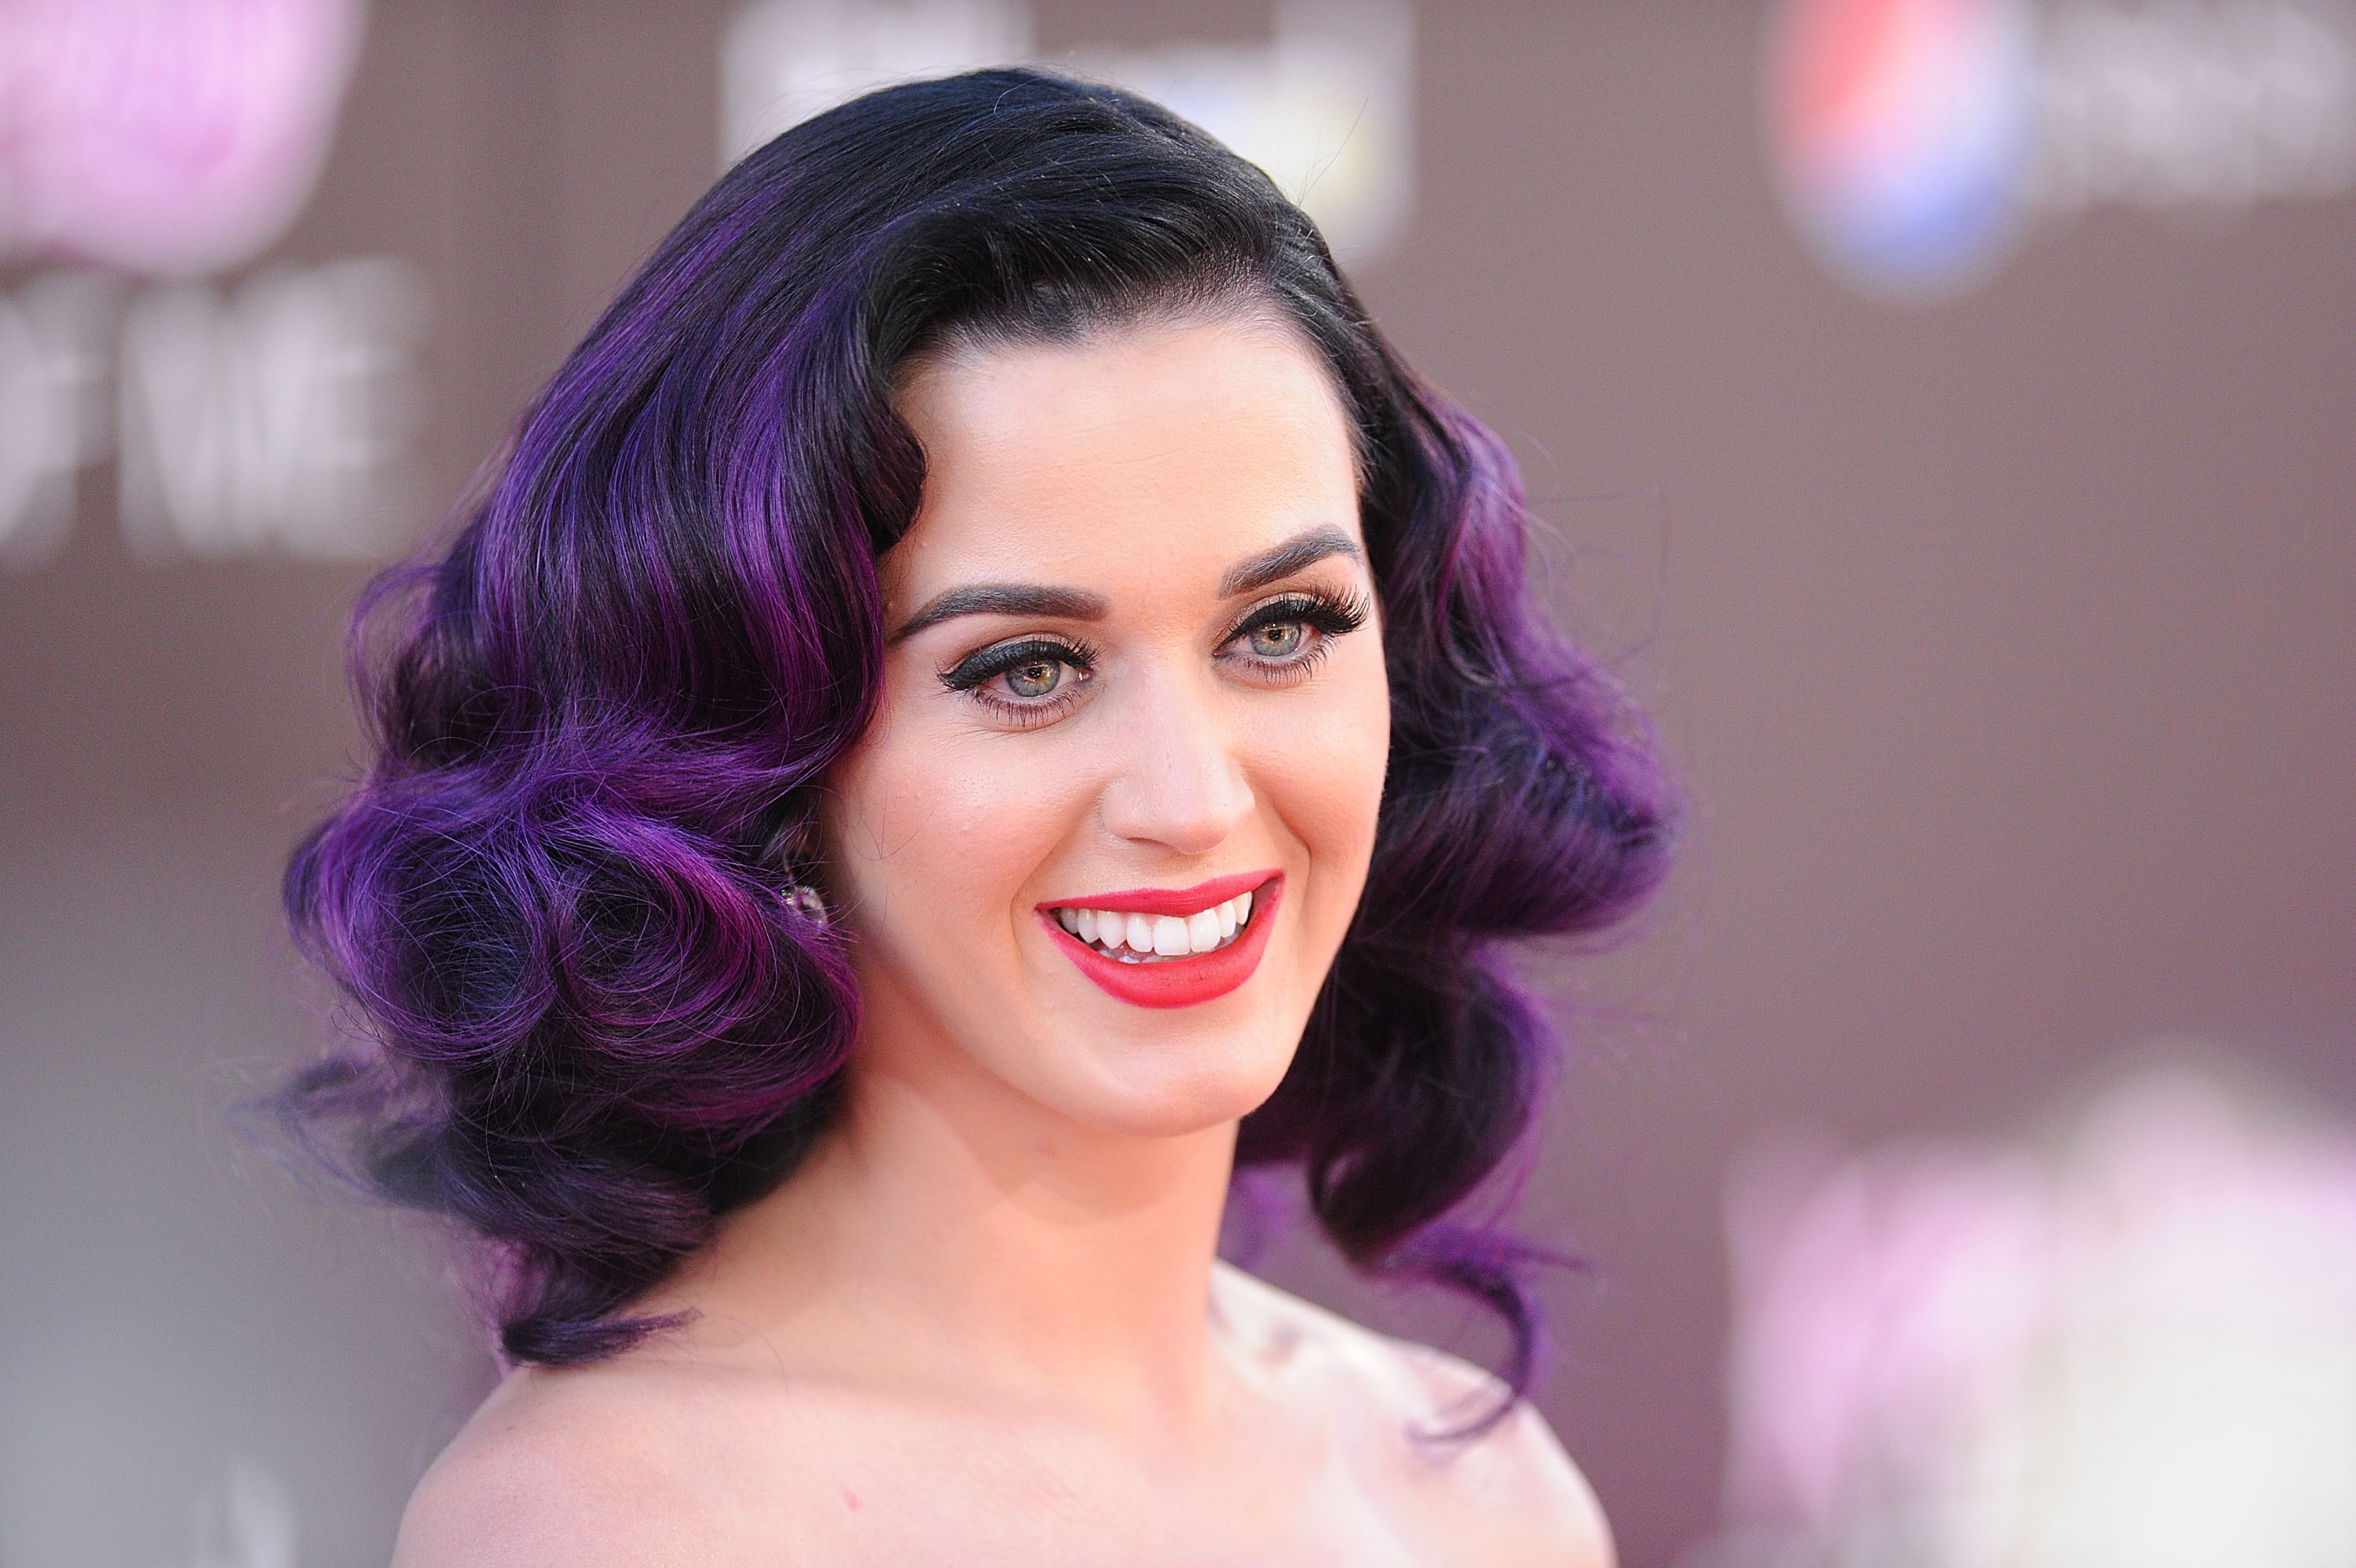 Does Dyeing Your Hair Purple Damage It? Here's What You Should Know